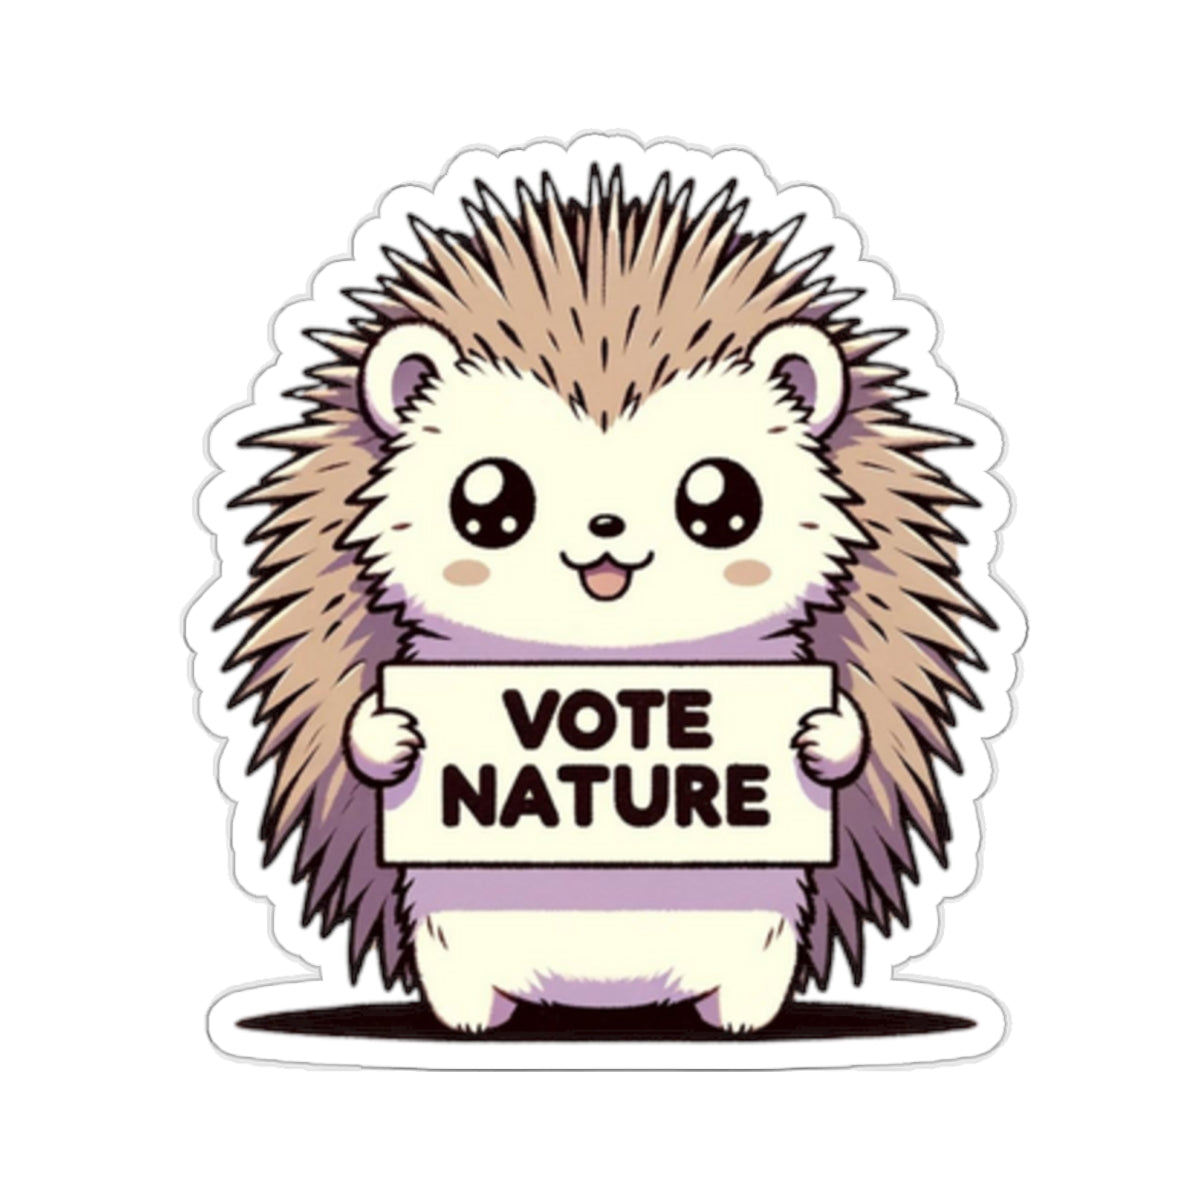 Inspirational Cute Porcupine Statement vinyl Sticker: Vote Nature! for laptop, kindle, phone, ipad, instrument case, notebook, mood board, or wall